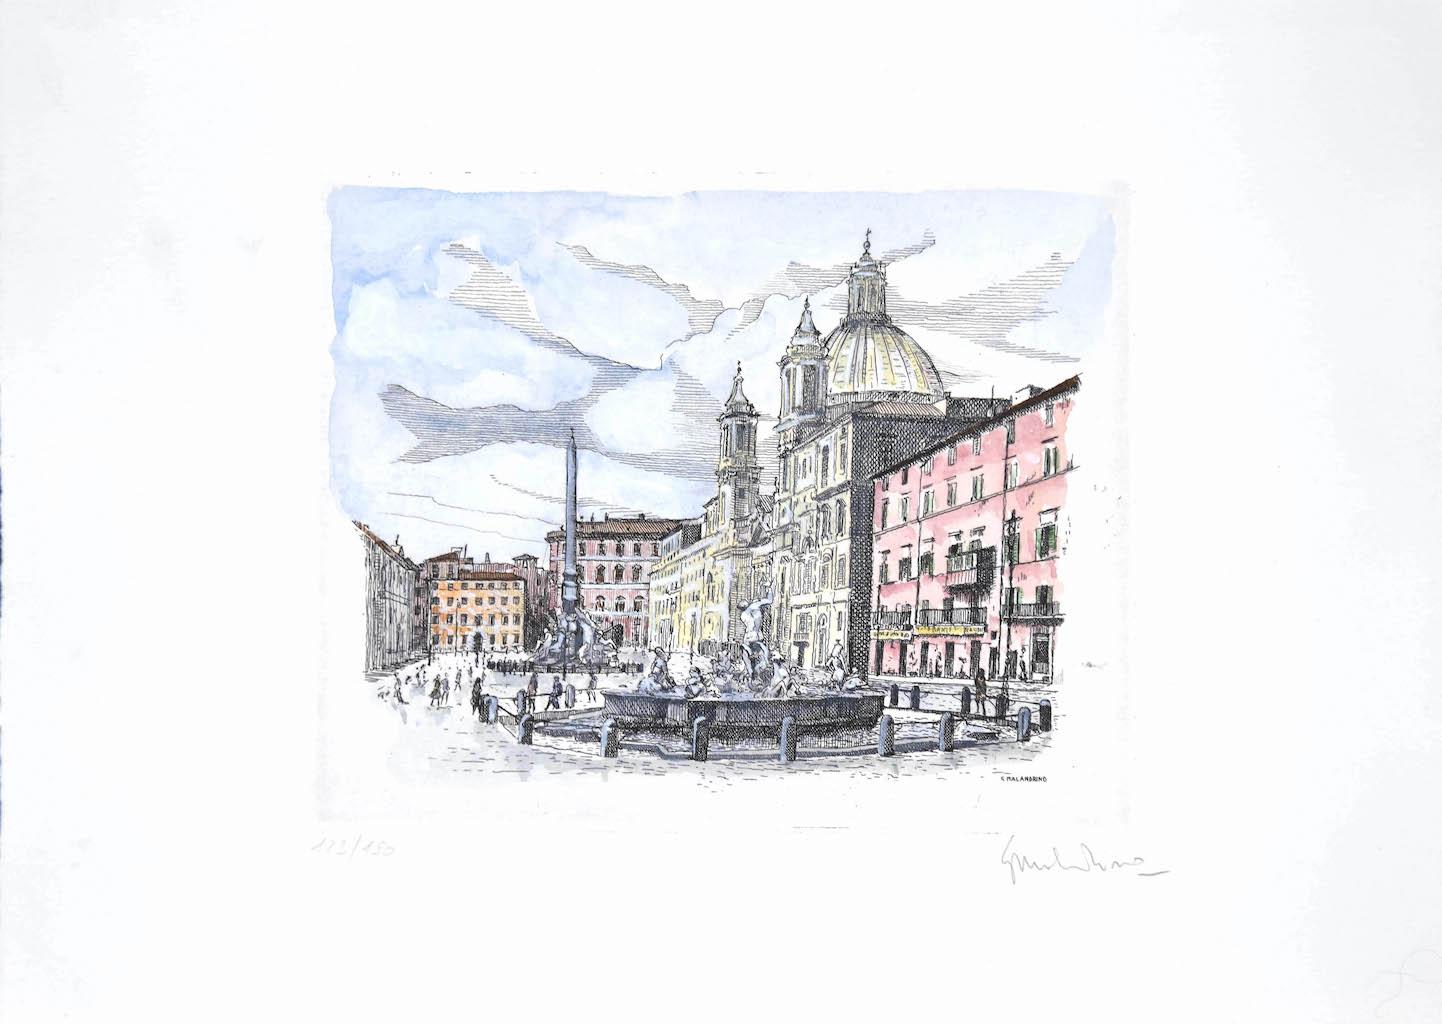 Navona Square is an original etching realized in the 1960s by Giuseppe Malandrino.

Original hand-colored print.

Image Dimensions: 15.5 x 16.5 cm

Hand-signed by the artist in pencil on the lower right corner.

Numbered, edition 123/190.

Good